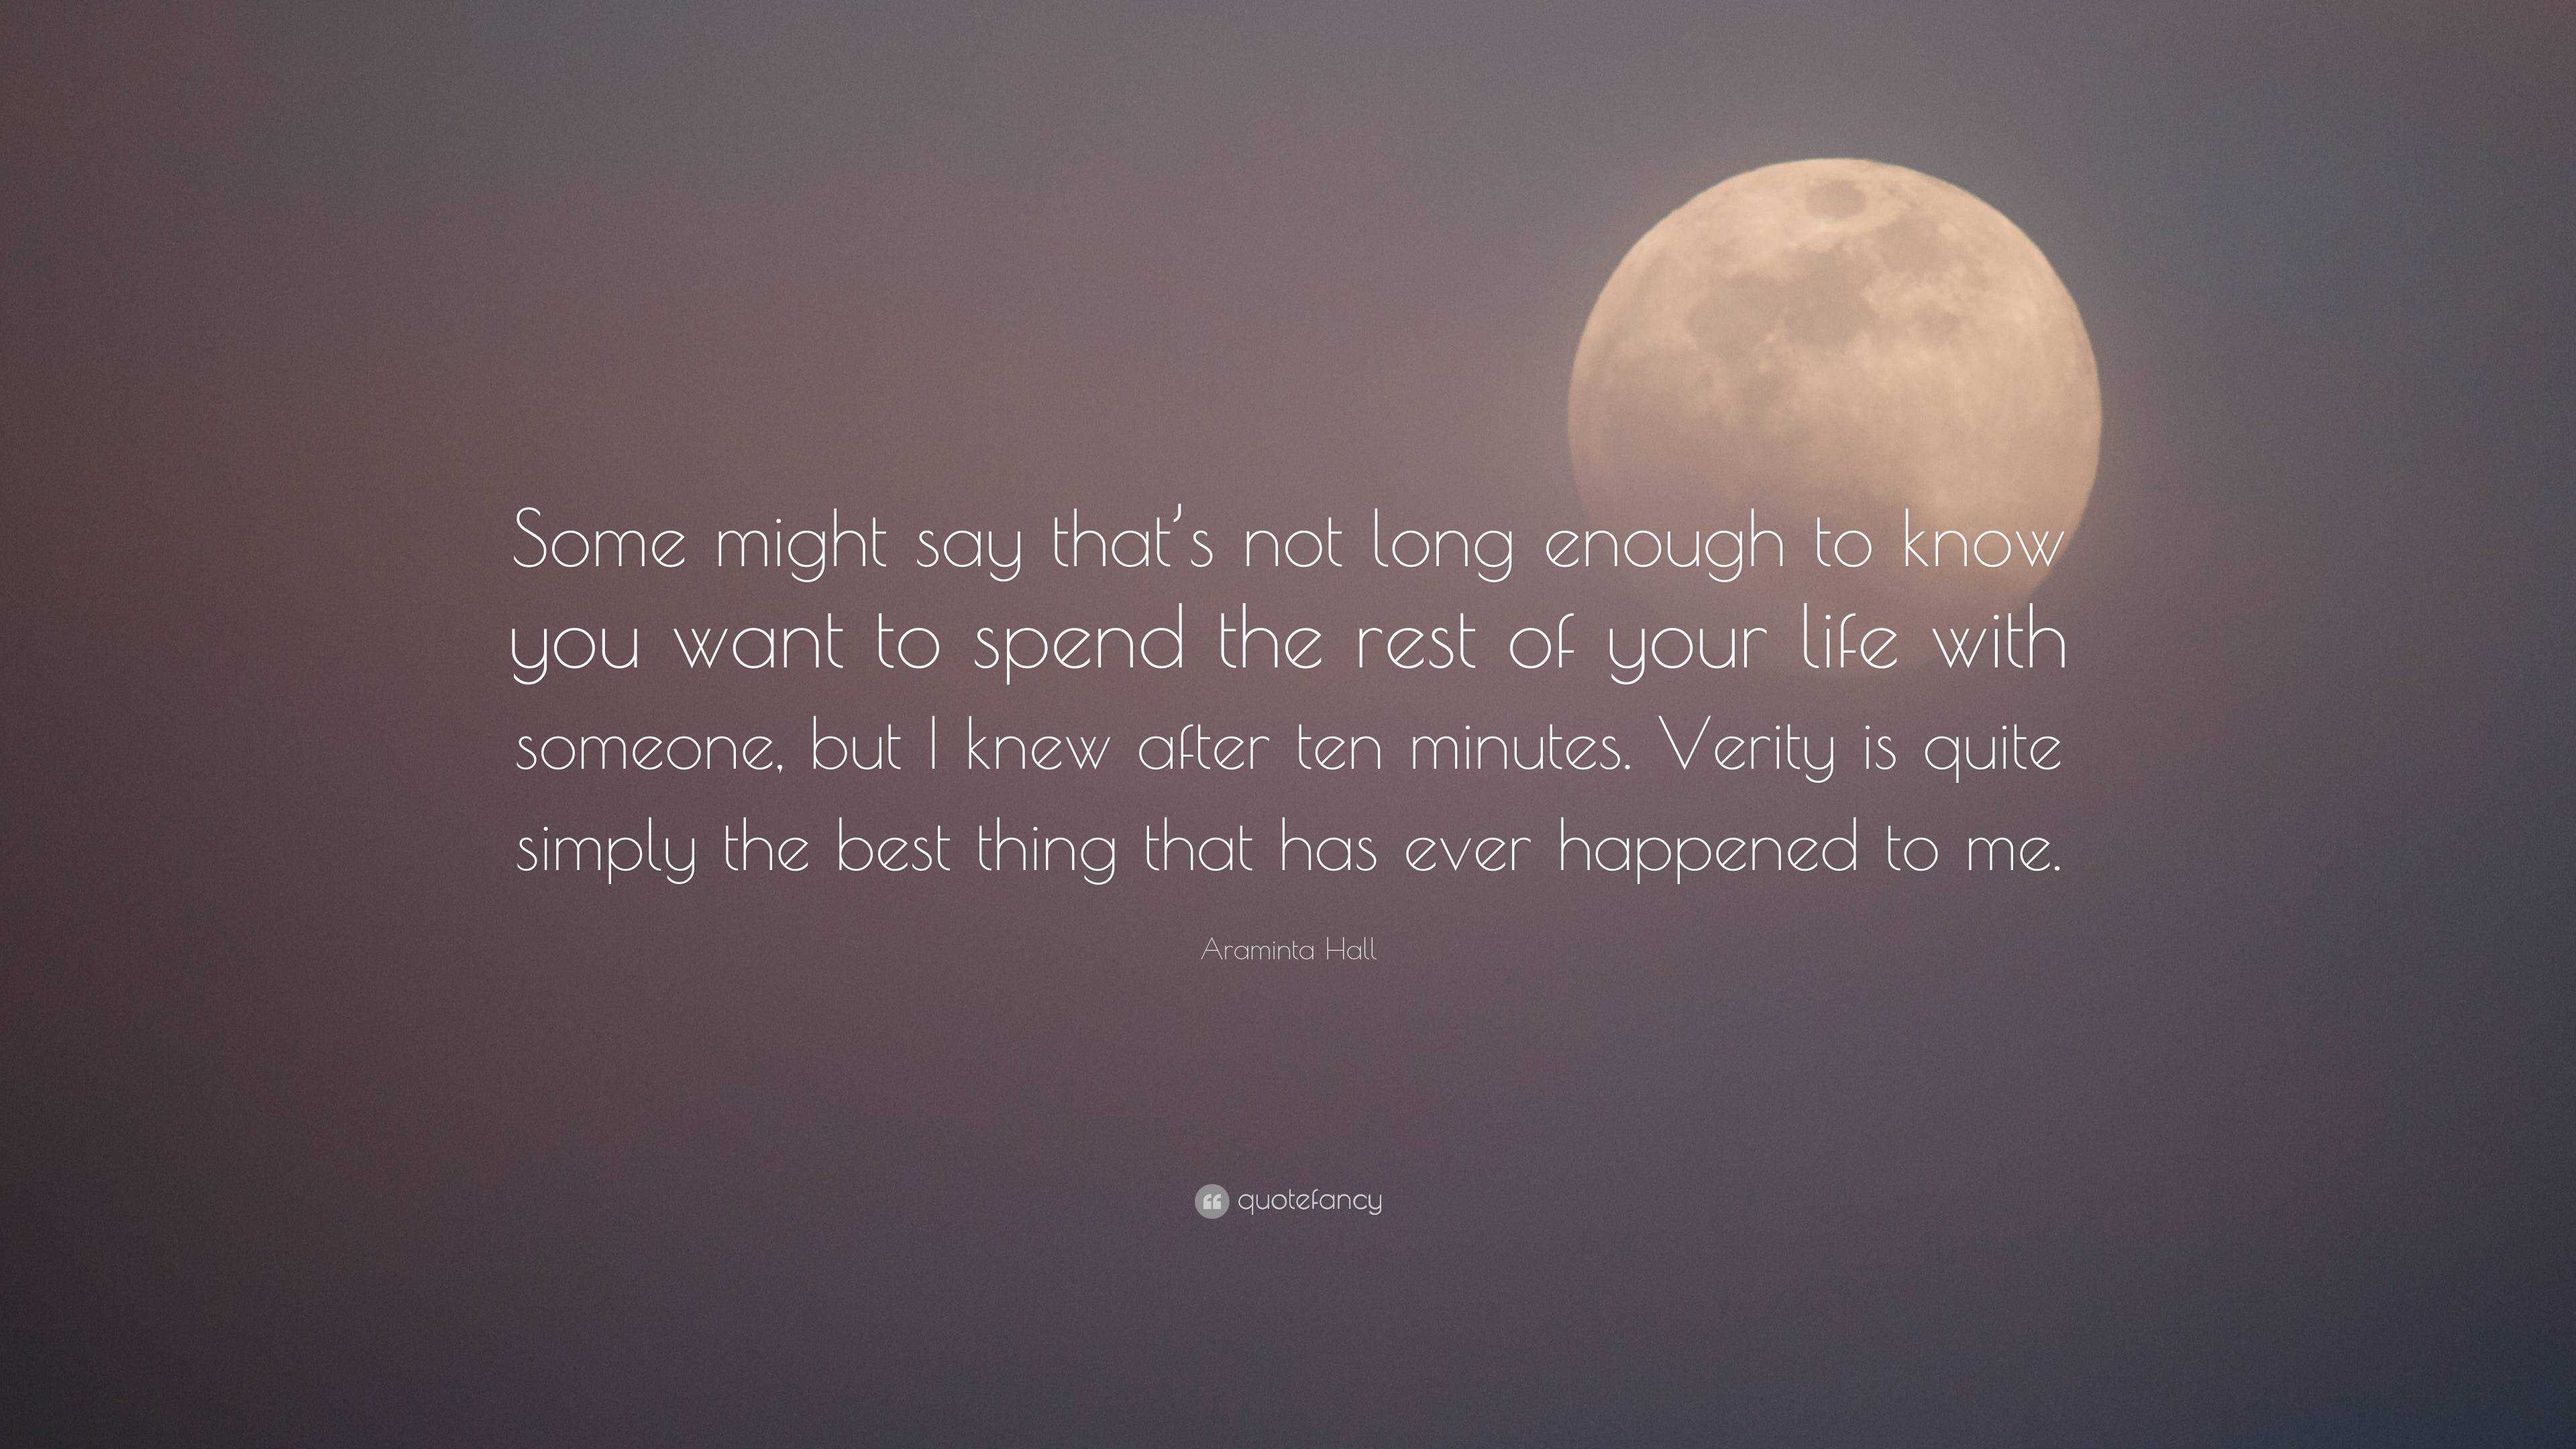 Araminta Hall Quote: “Some might say that’s not long enough to know you ...